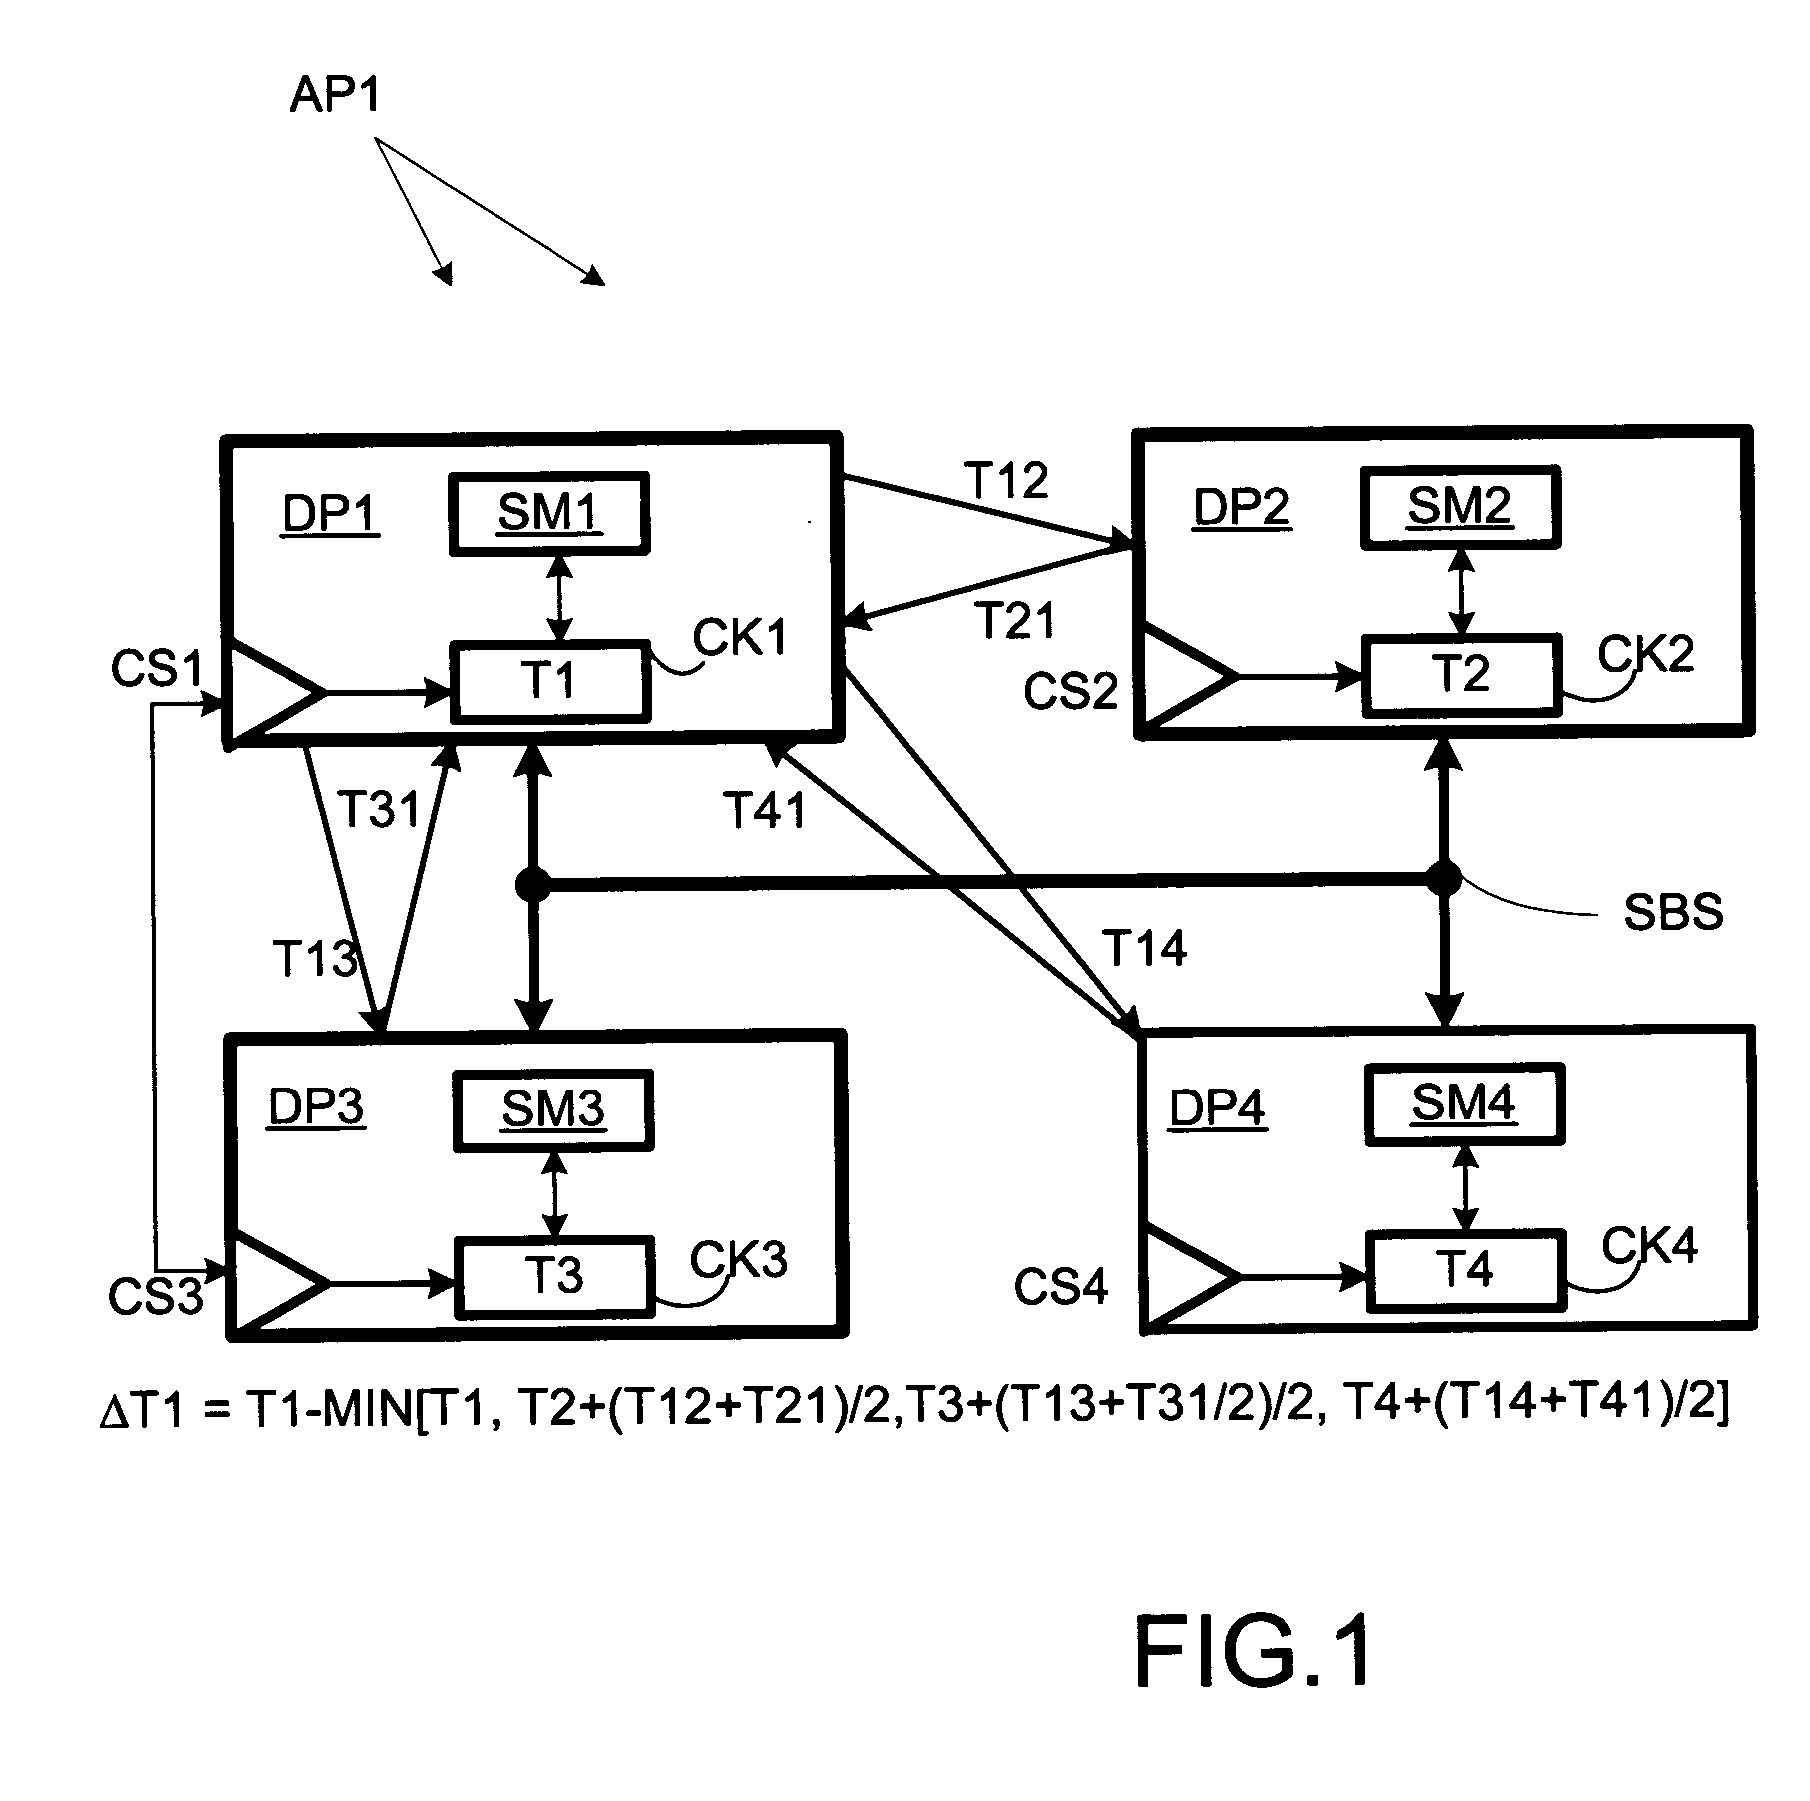 Multiprocessor system with interactive synchronization of local clocks